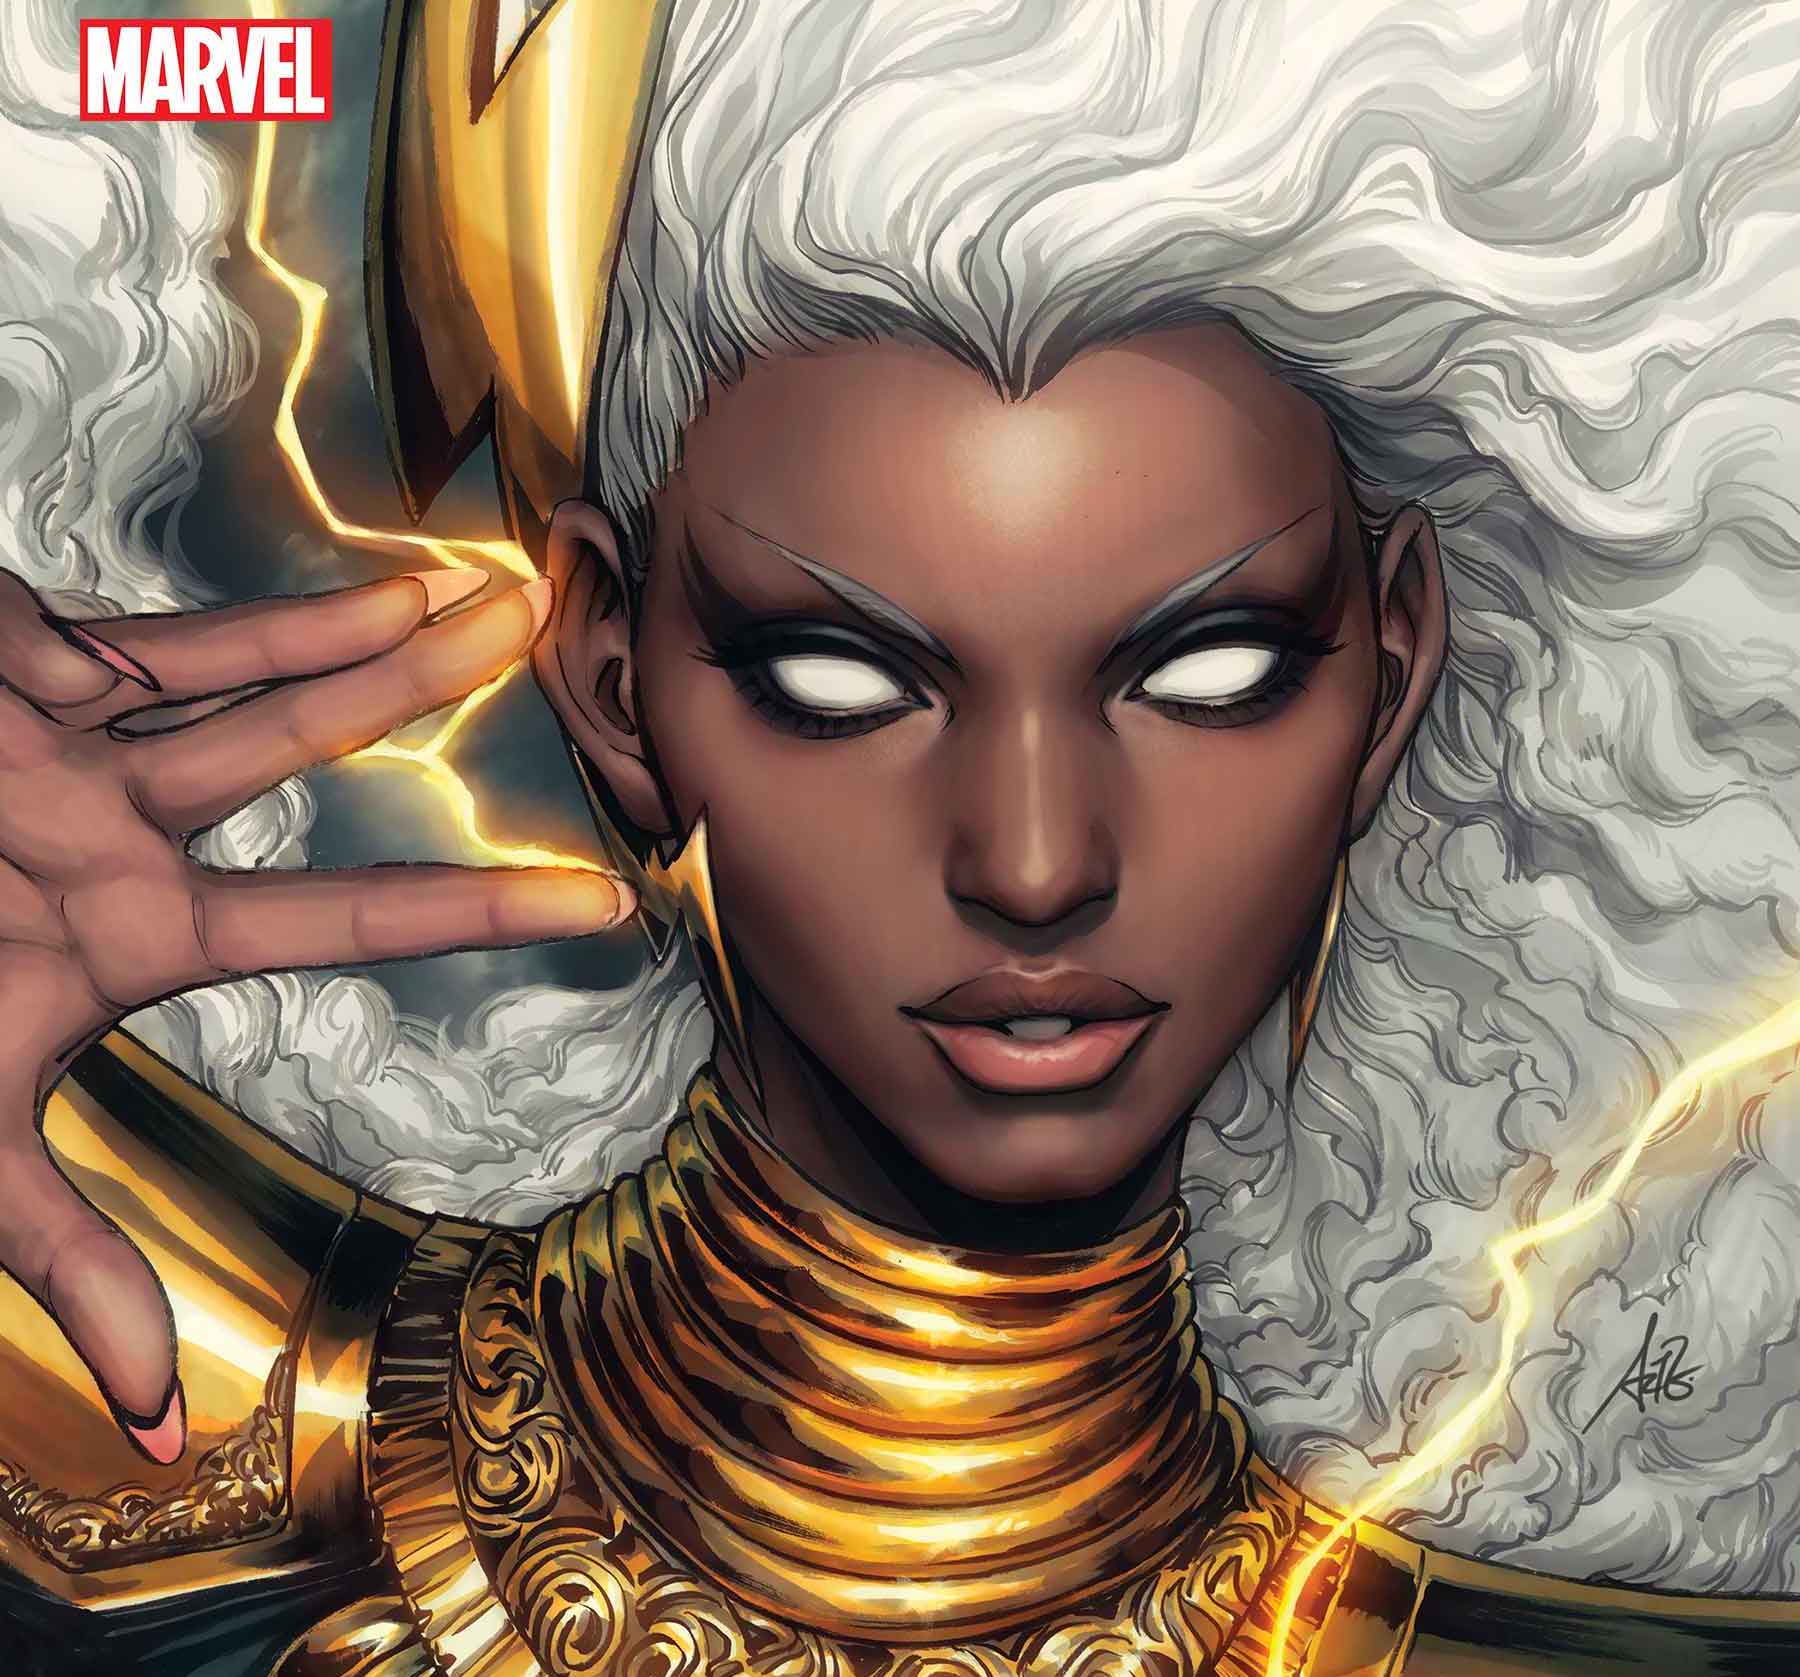 Feast your eyes on Stanley 'Artgerm' Lau's 'Storm' #1 cover